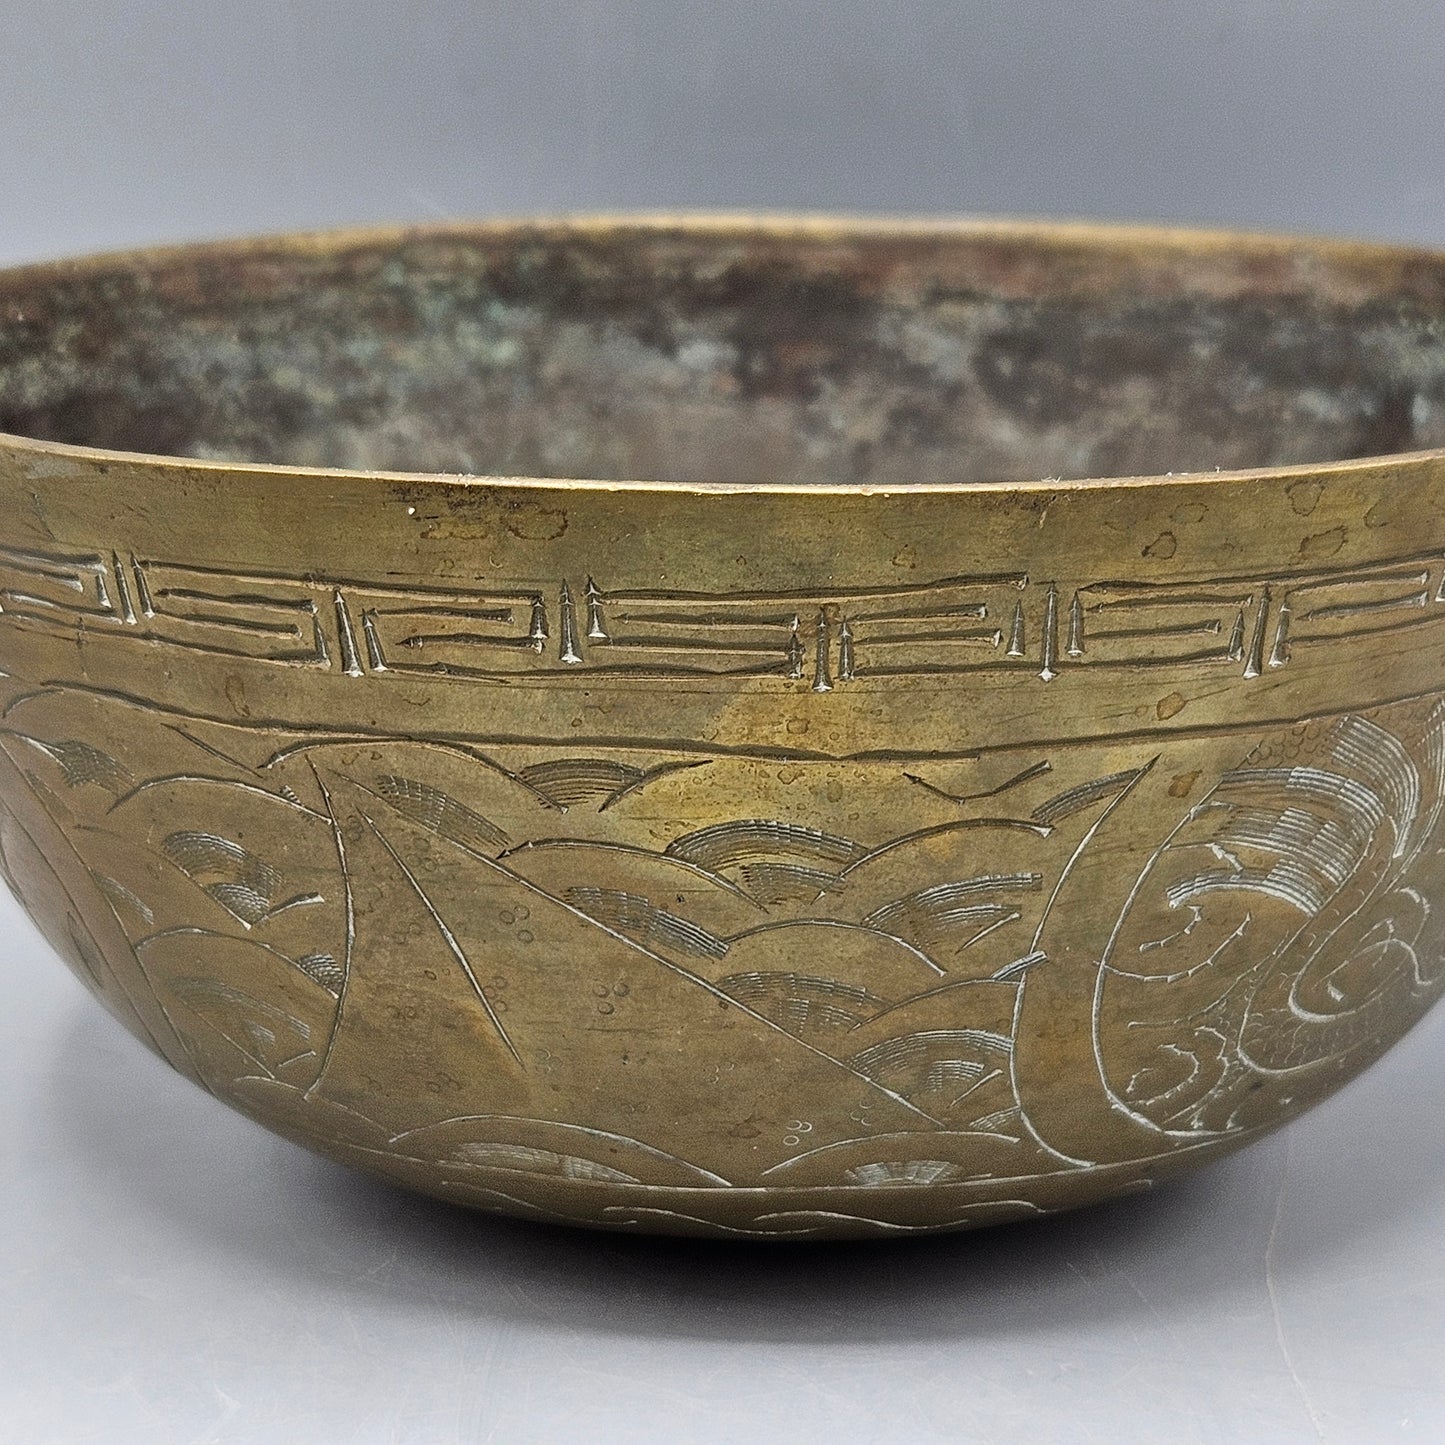 Vintage Chinese Brass Bowl with Dragons